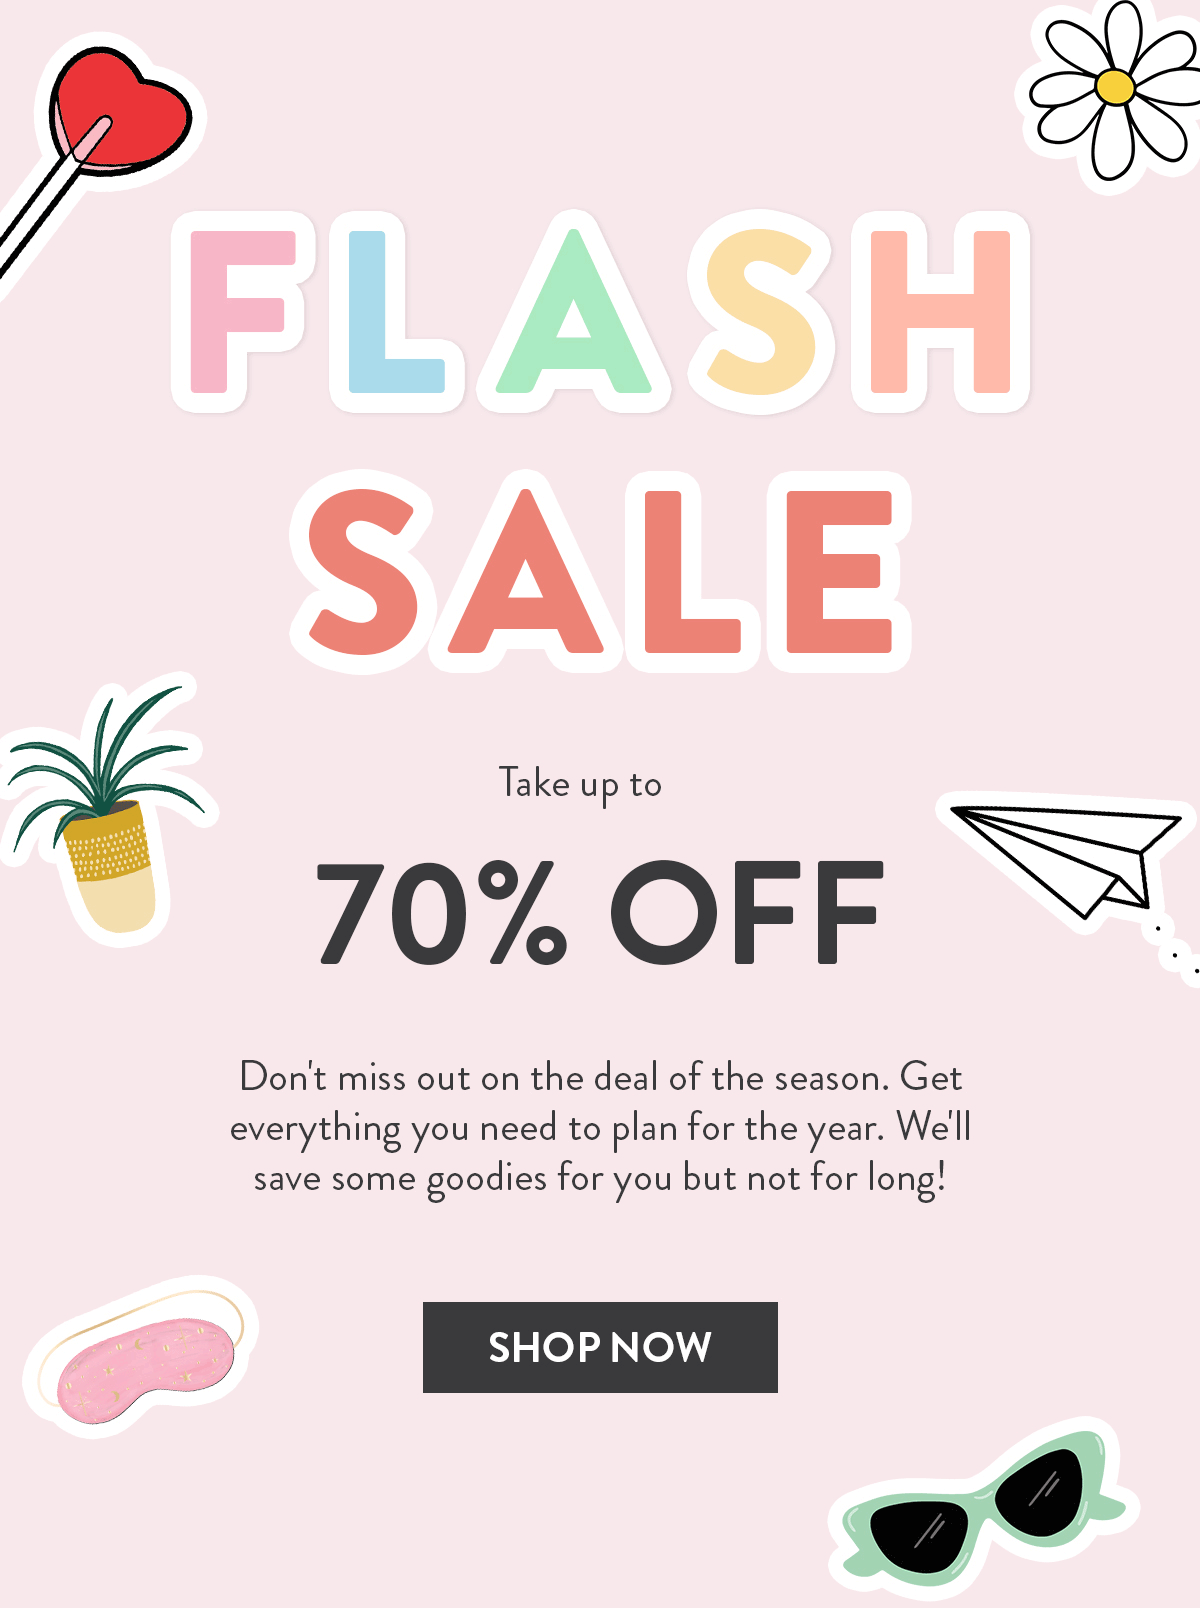 SALE STARTS TODAY: Don't Miss Out on Huge Savings at Fytika's